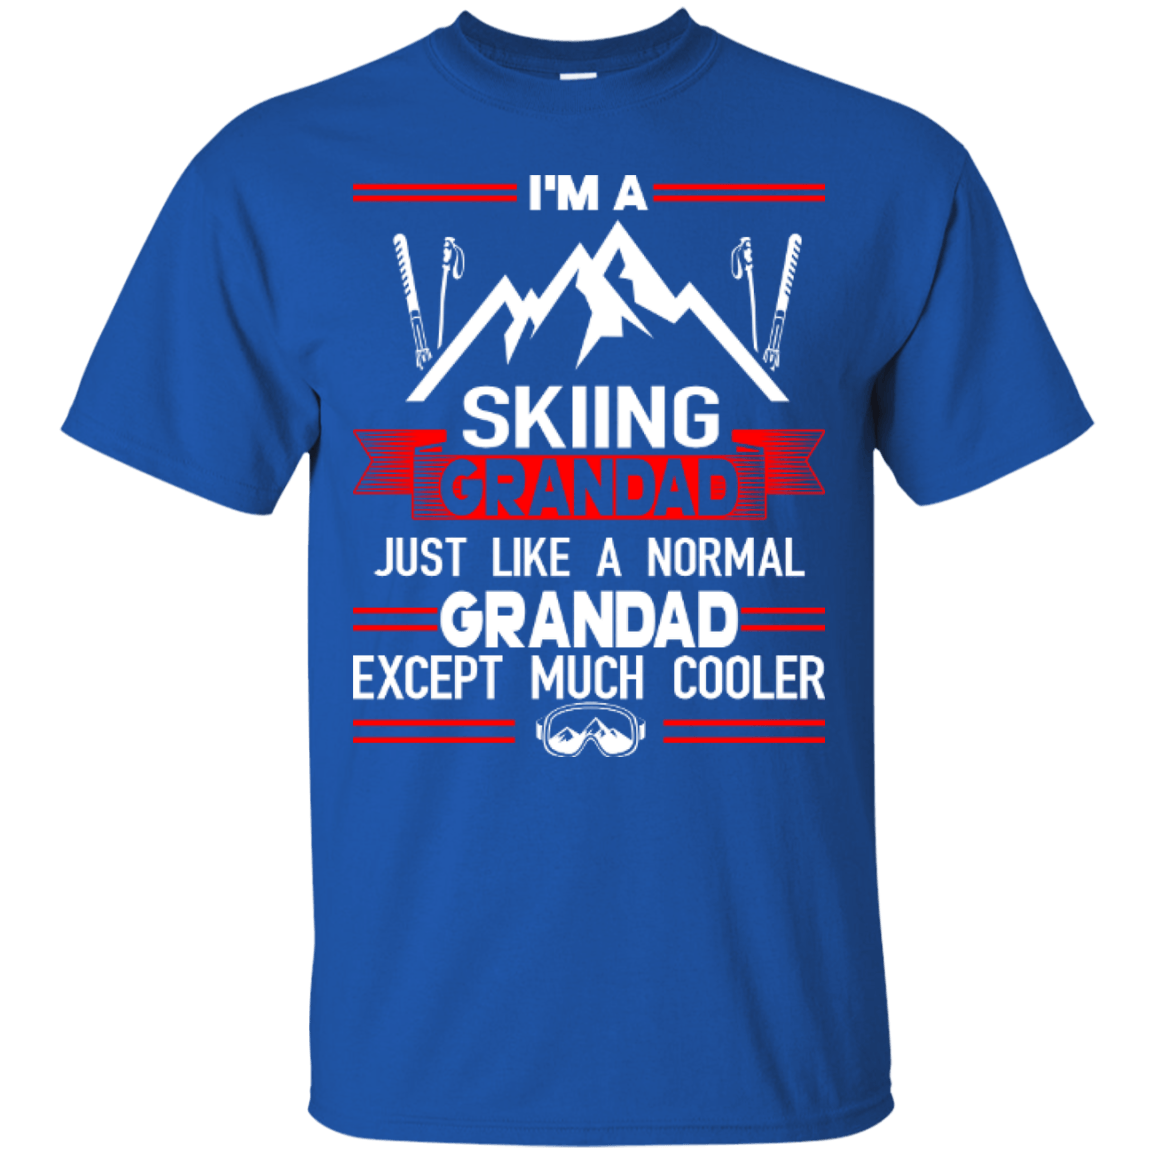 I'm A Skiing Grandad Just Like A Normal Grandad Except Much Cooler Tees - Powderaddicts